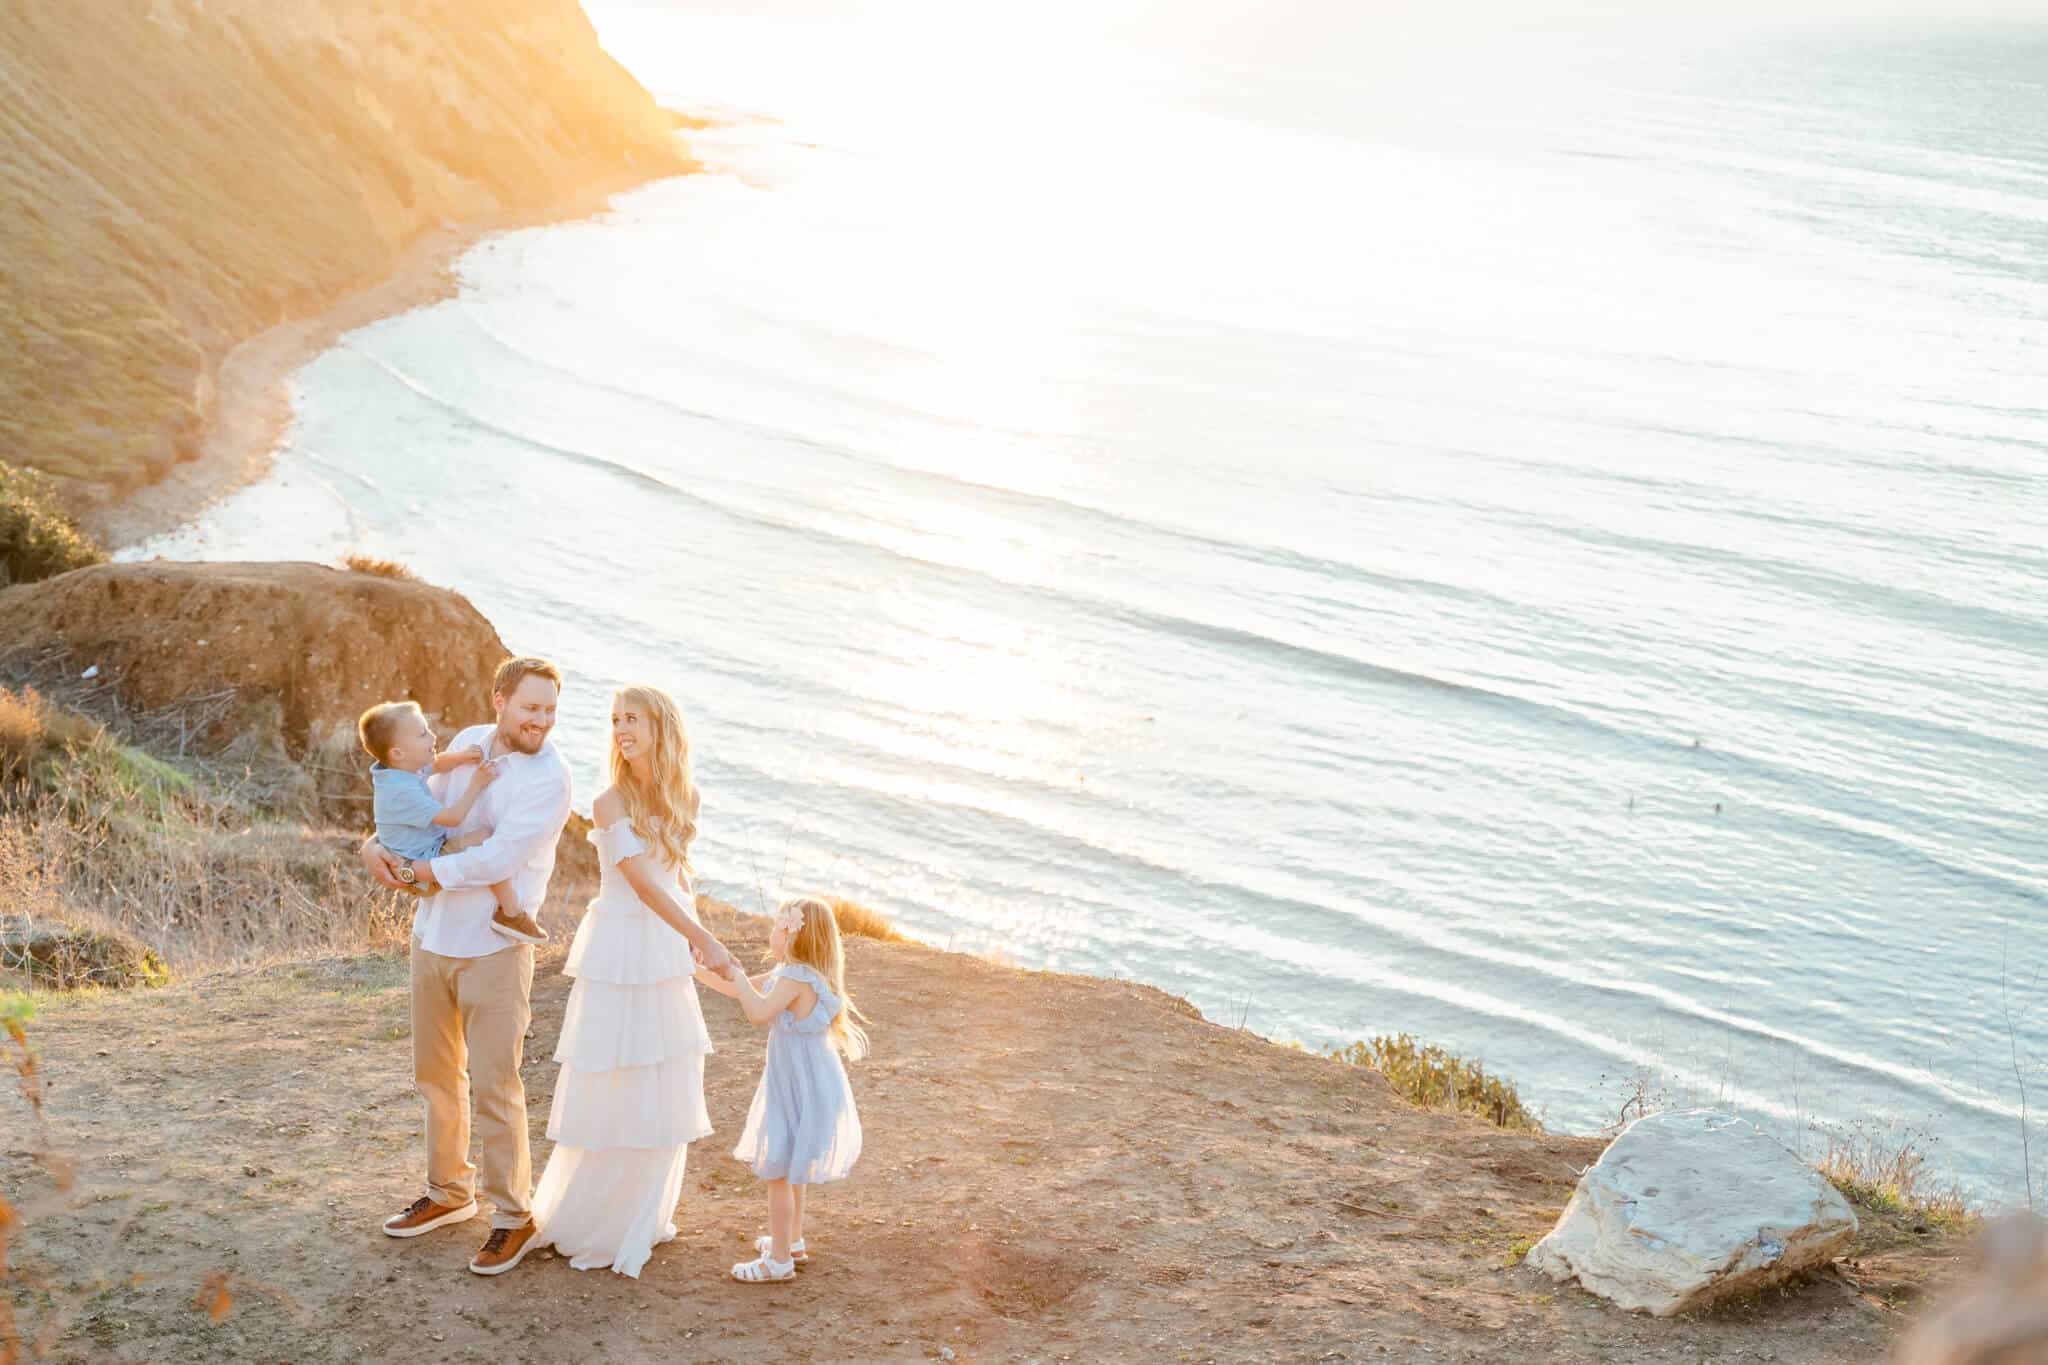 Family of four on California Cliffside dancing. Mom dancing with daughter, dad holding son, with parents looking at each other. Balboa Fun Zone